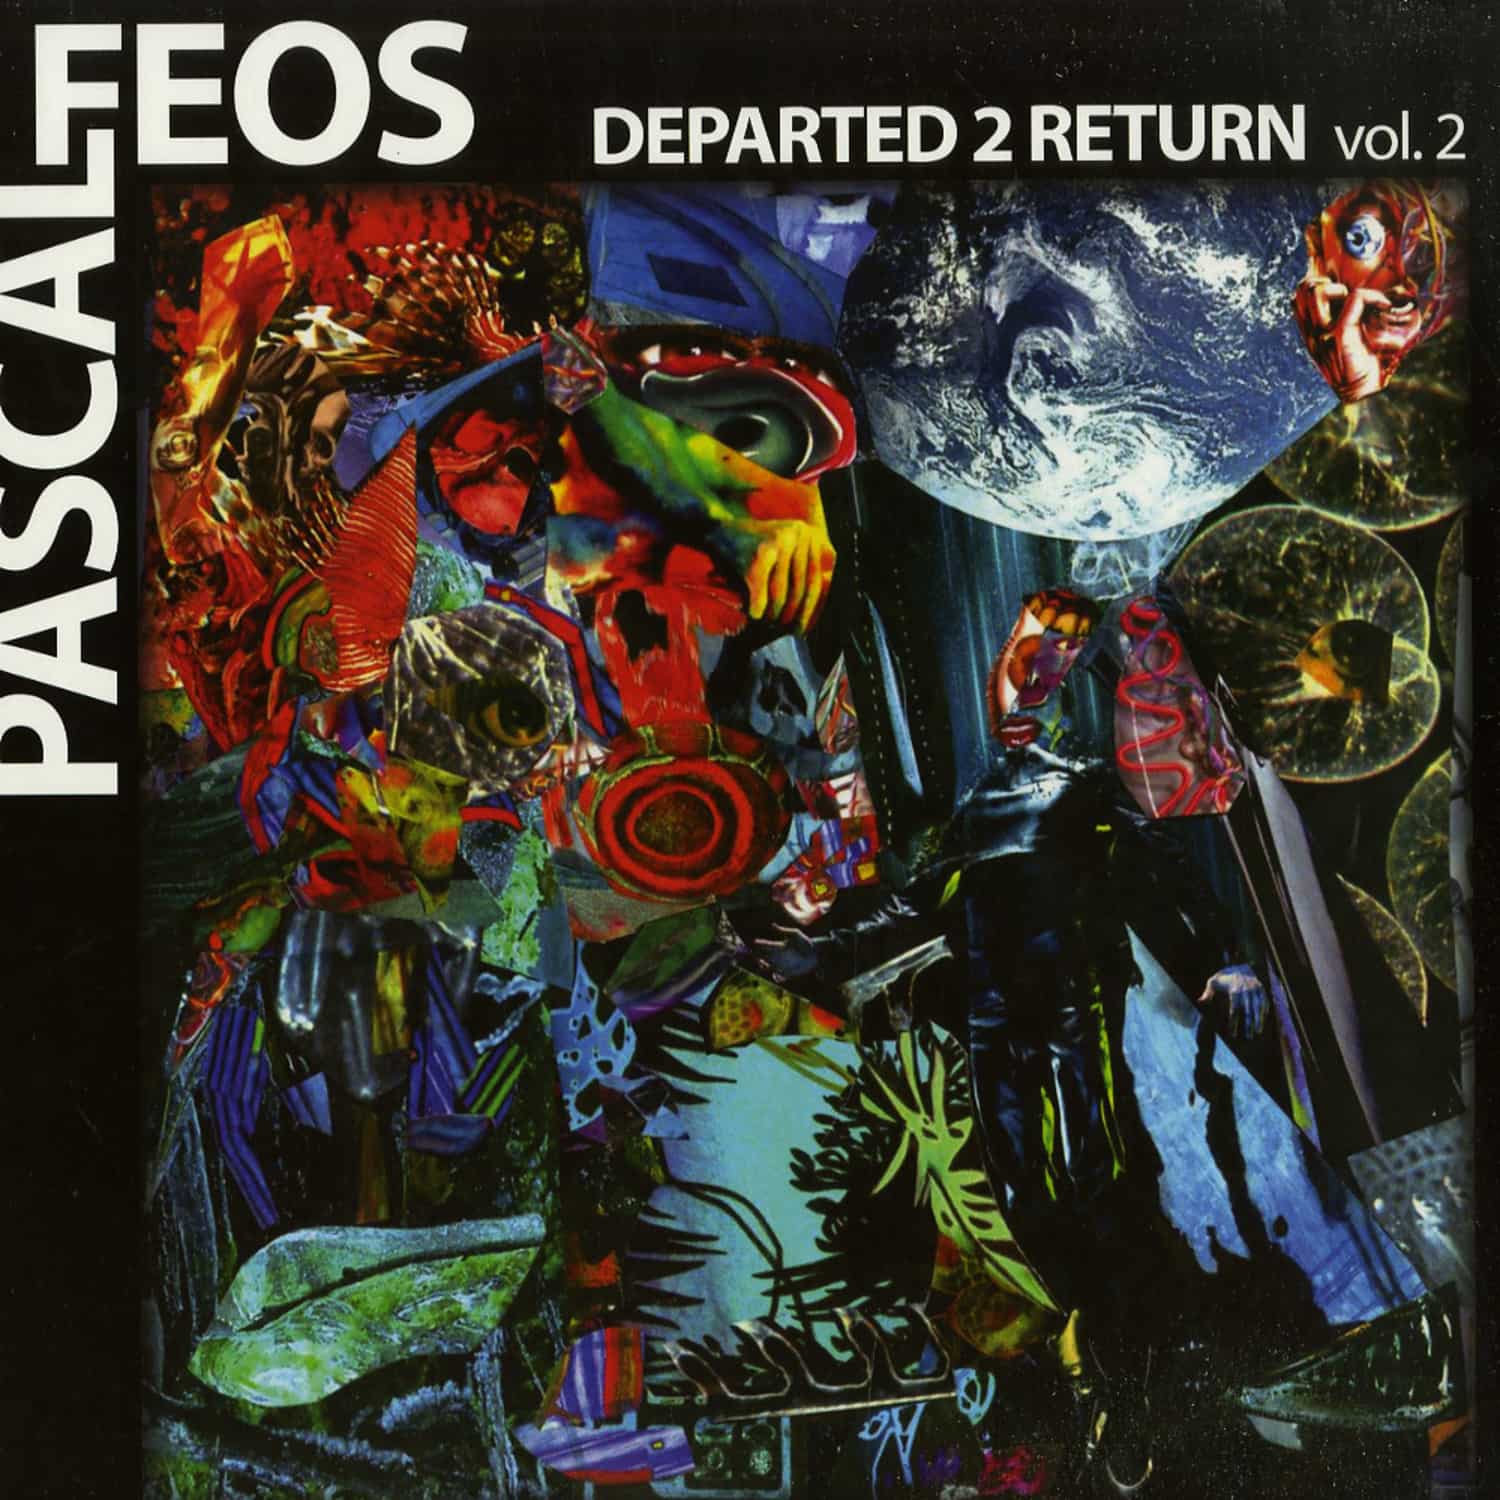 Pascal Feos - DEPARTED 2 RETURN PART 2 